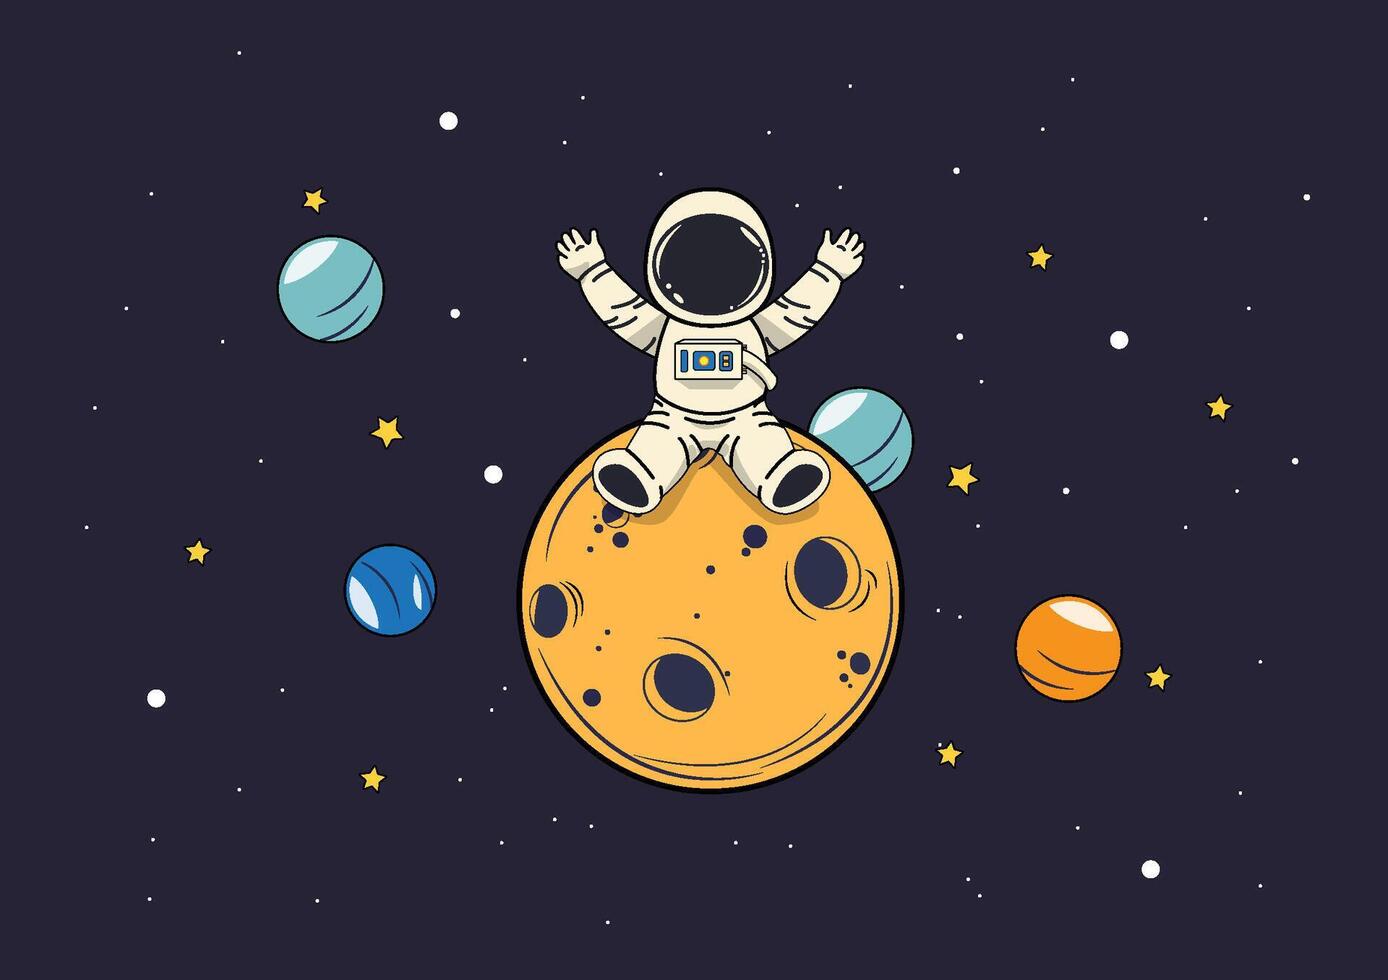 Cartoon illustration of an astronaut seated on the moon, surrounded by planets and stars. the adventurous spirit of space exploration, with the astronaut gazing at the cosmos. cartoon and vector